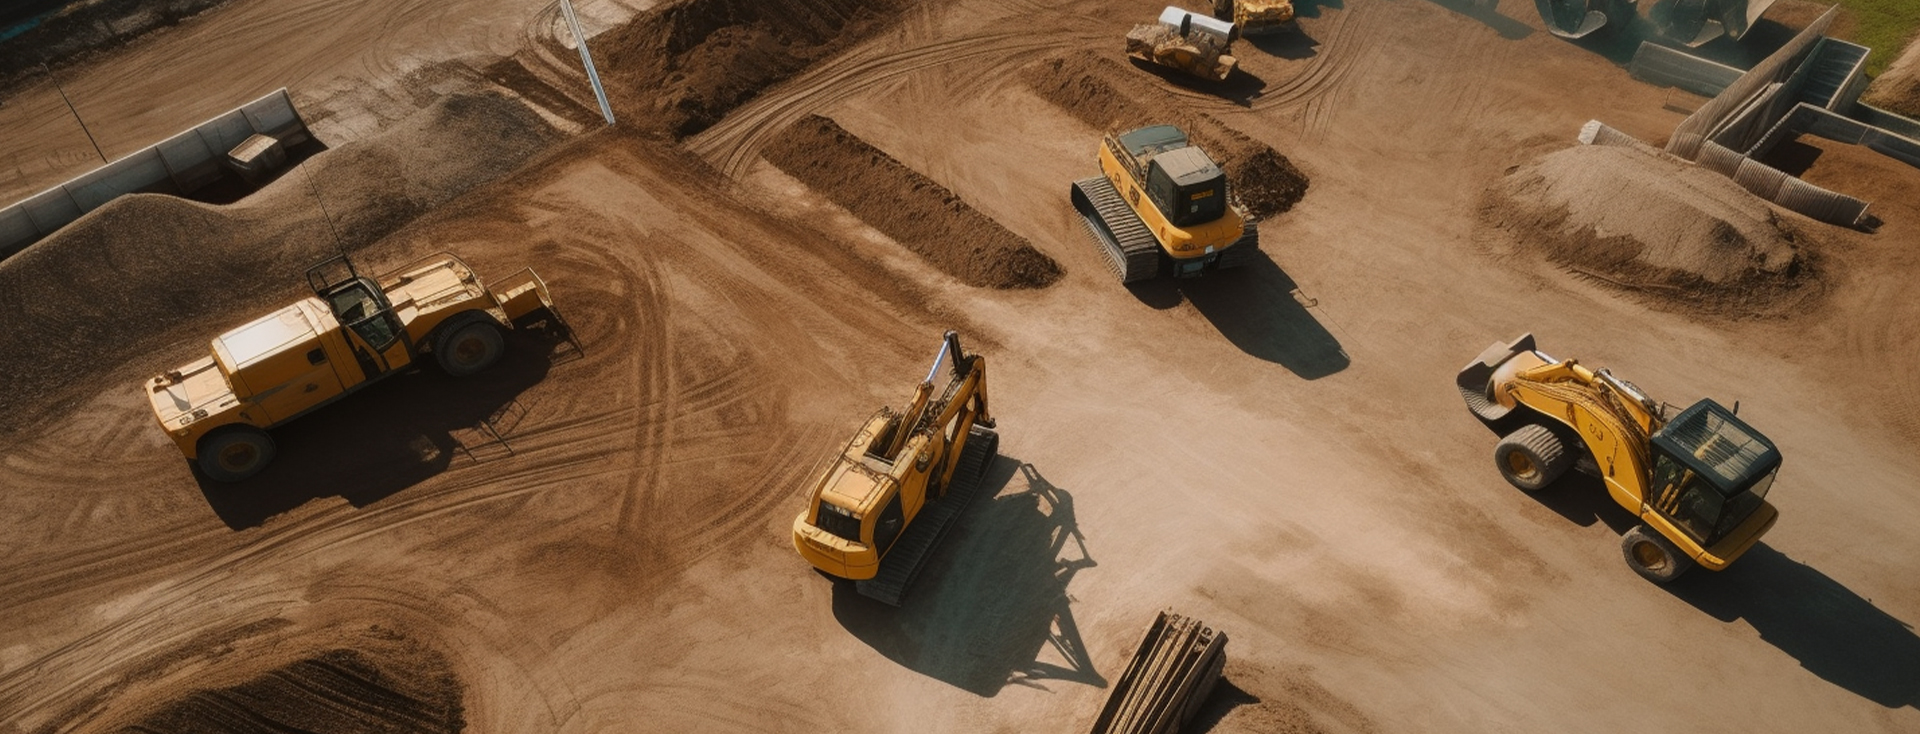 Construction site with vehicles in sand